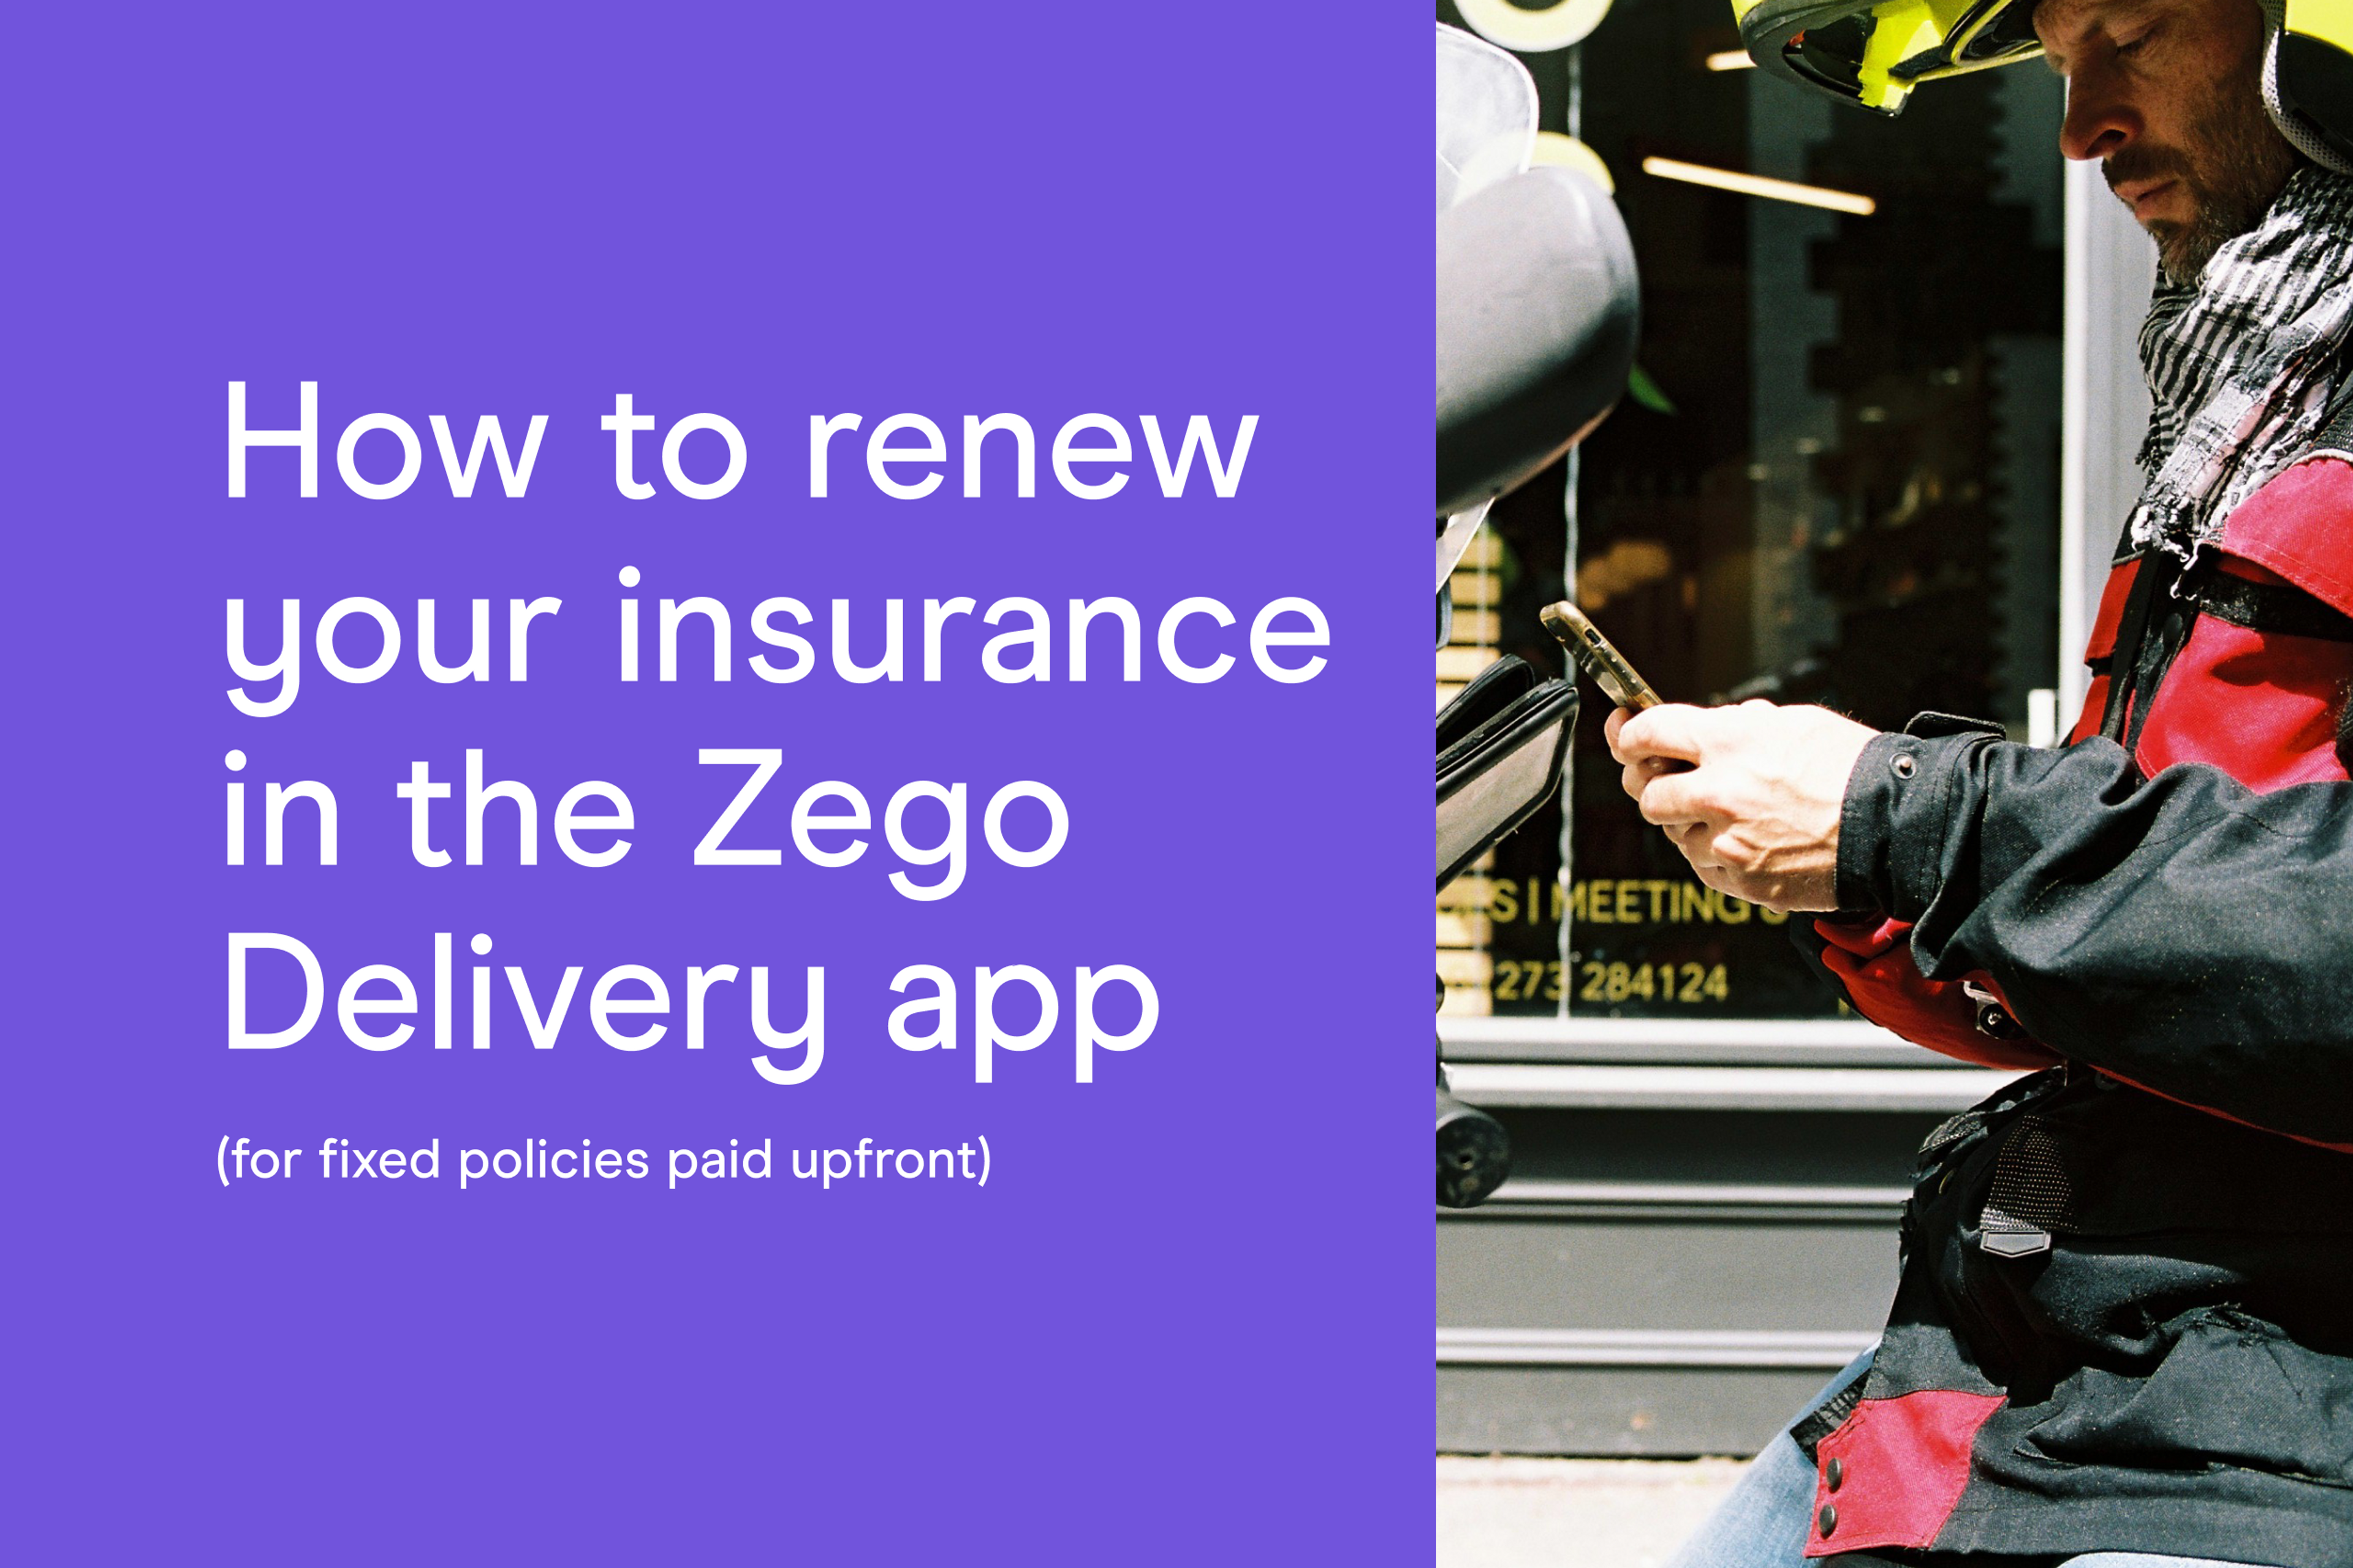 How to renew your insurance in the Zego Delivery app (for 30-day or annual policies paid upfront)